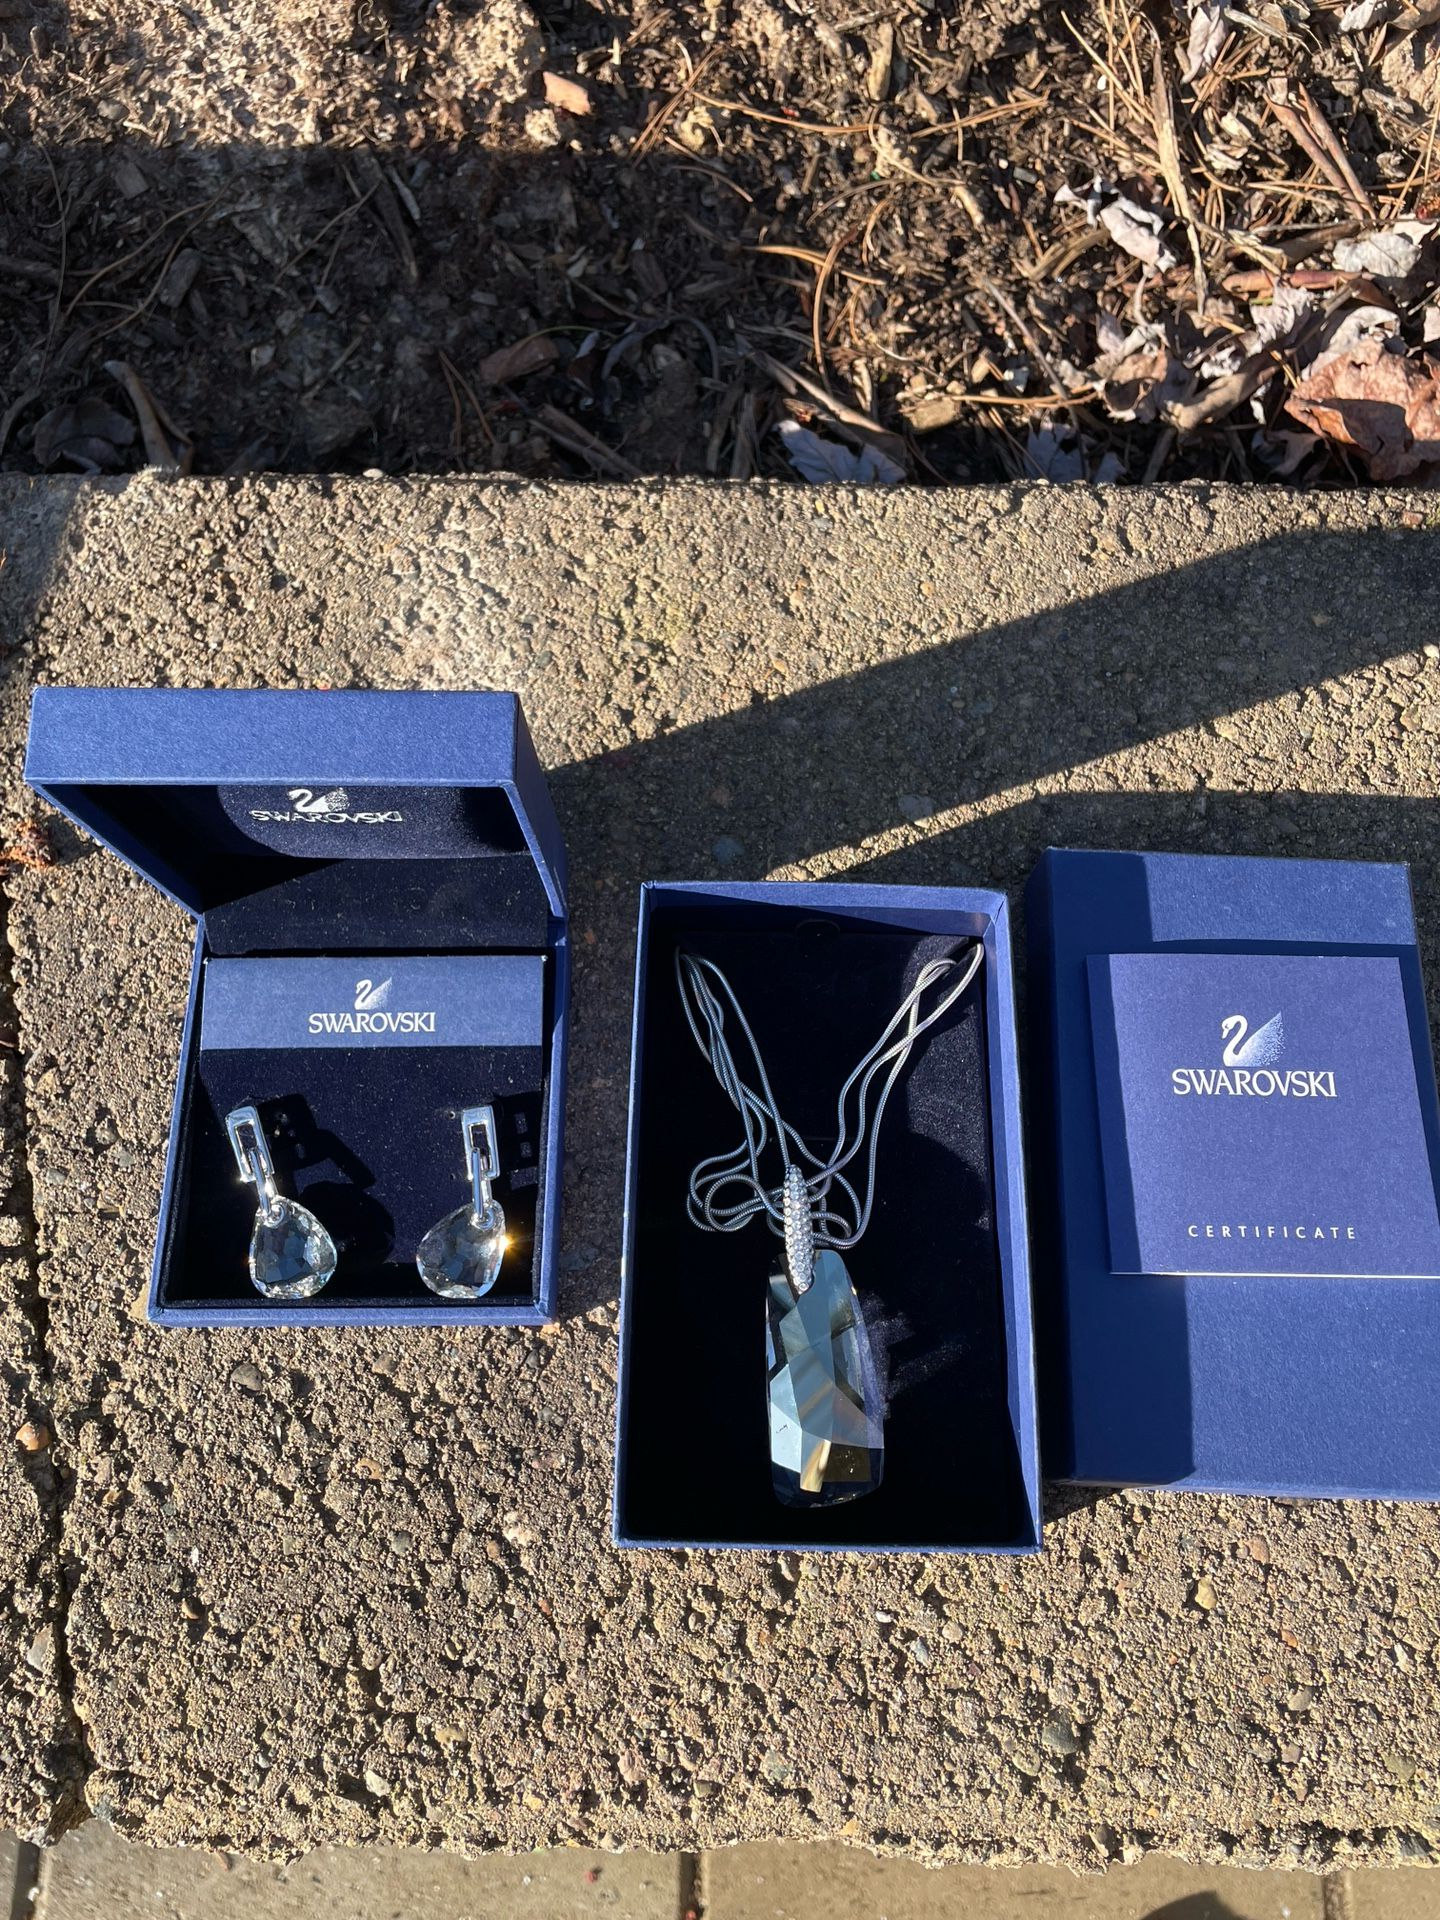 Swarovski diamond Earrings And Necklace Proof Of Authenticity Never Used With Original Box